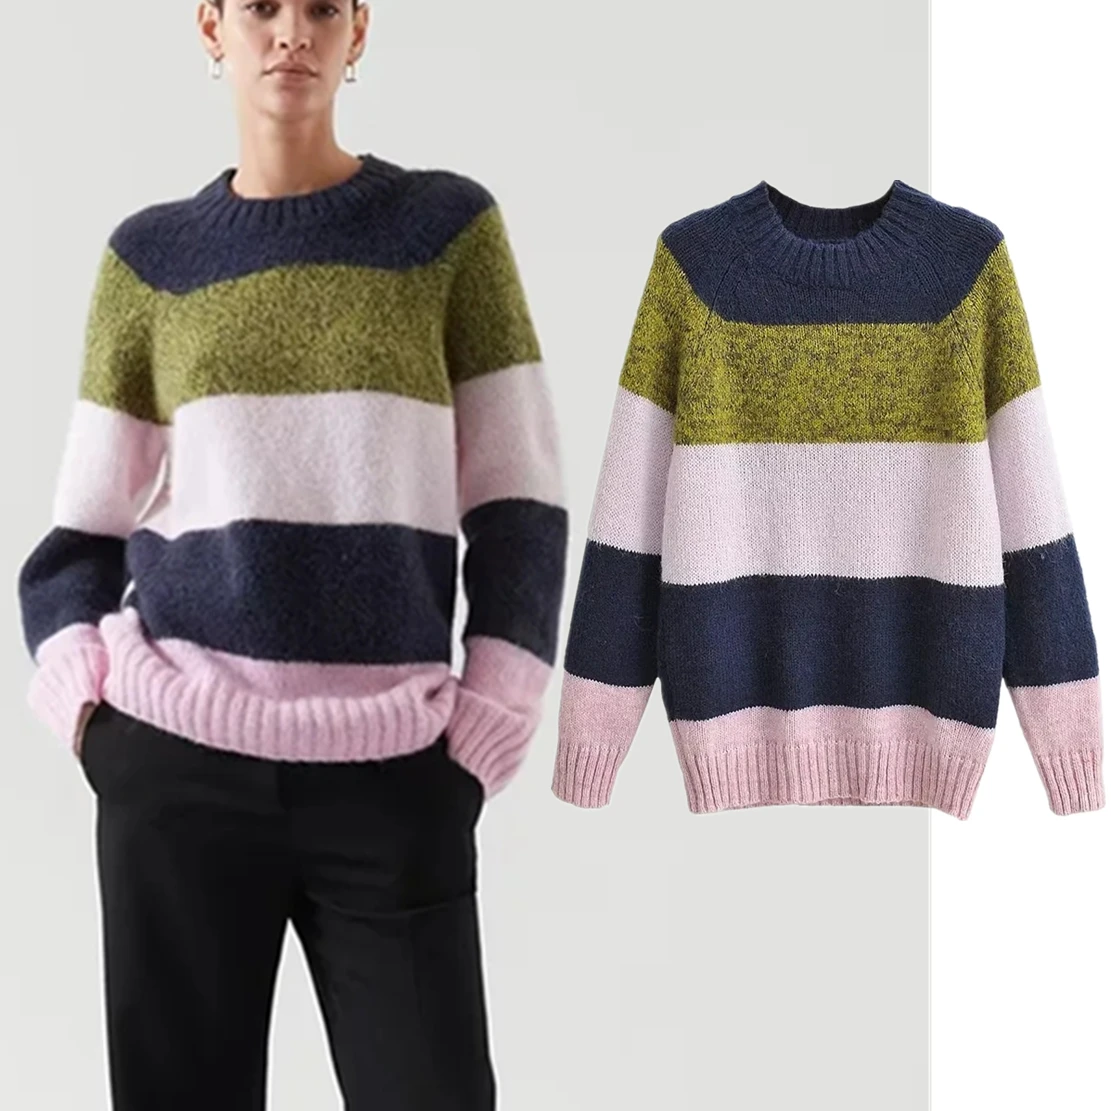 

Elmsk England Style Contrast O-neck Pullovers Tops Fashion Retro Striped Color Loose Sweaters Women